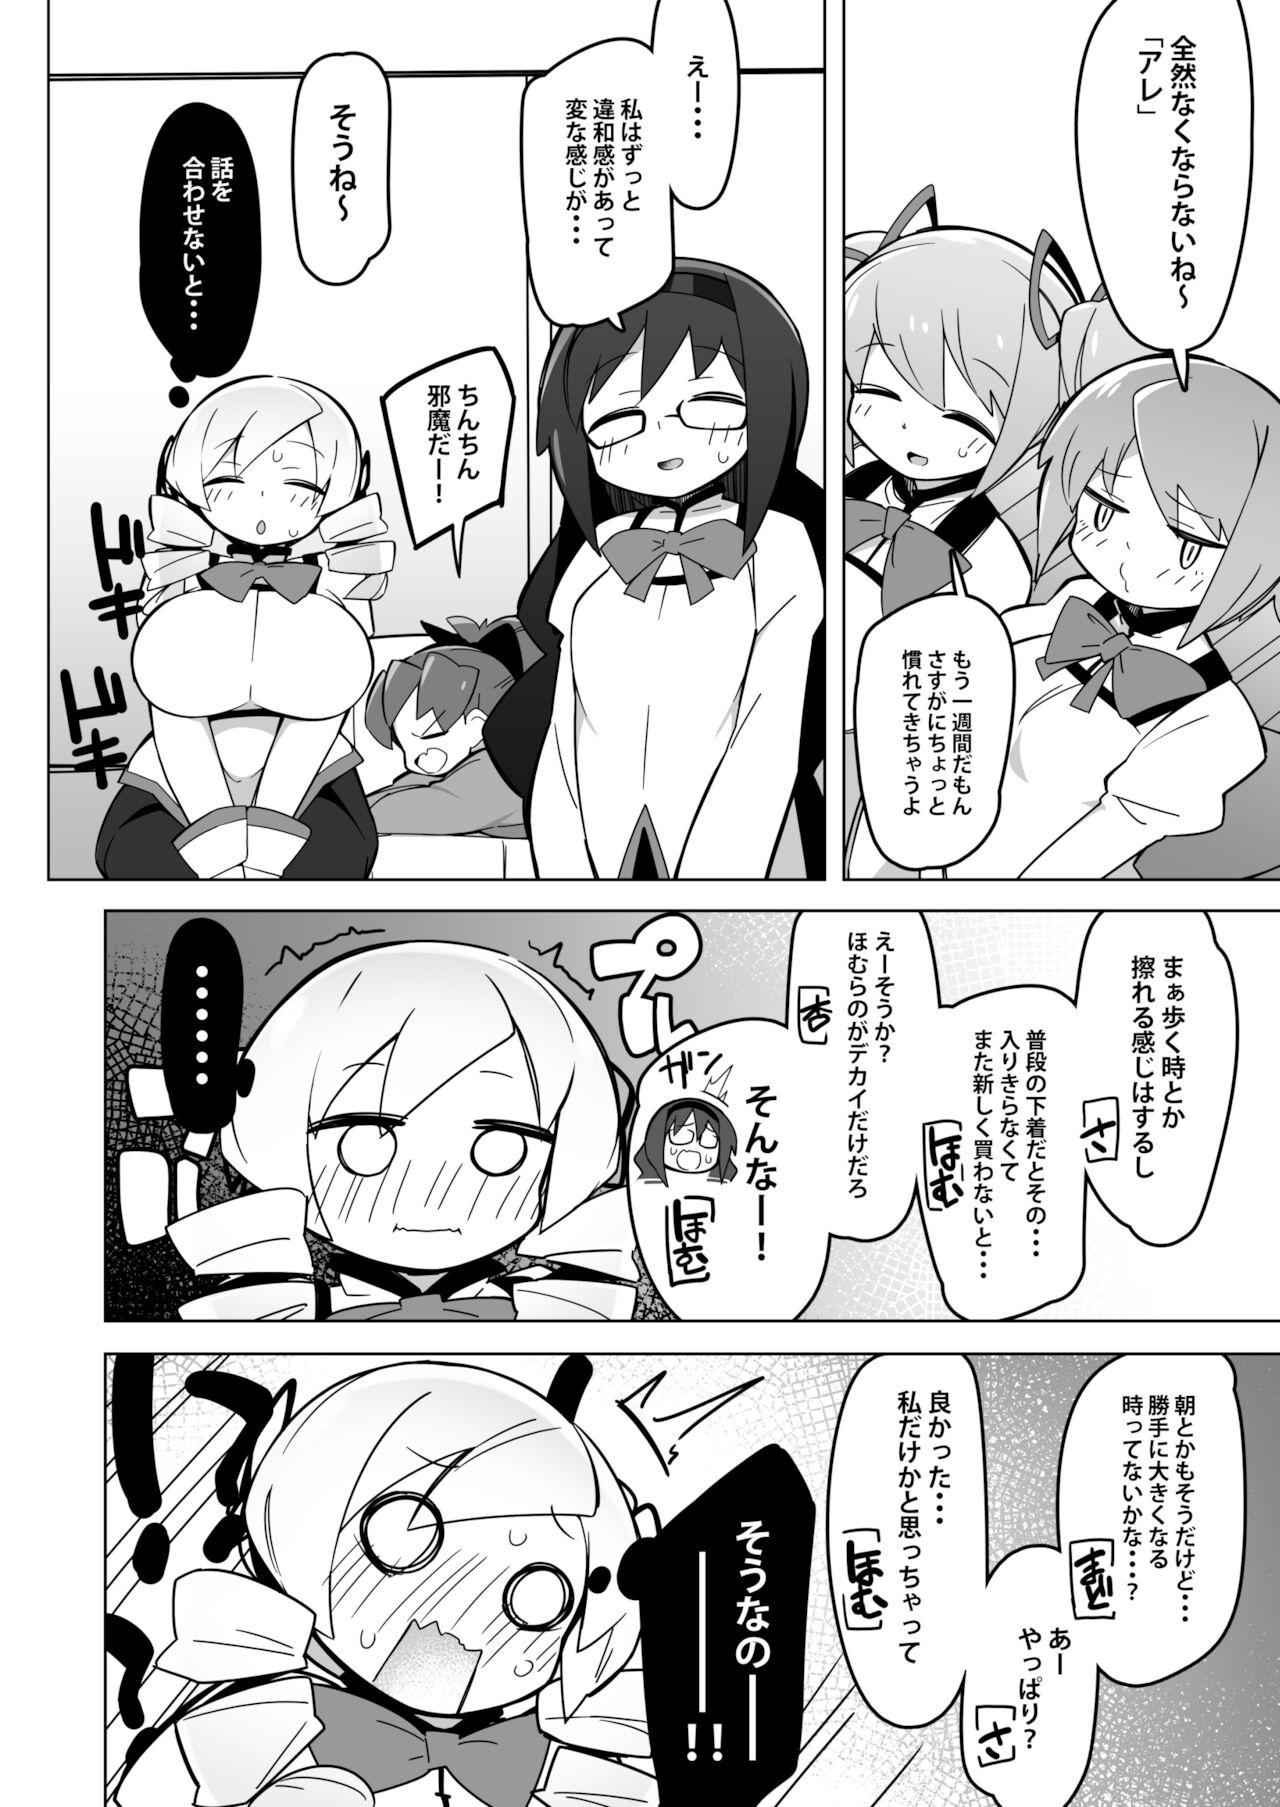 Soapy Massage Only Mami Doesn't Grow - Puella magi madoka magica First Time - Page 2